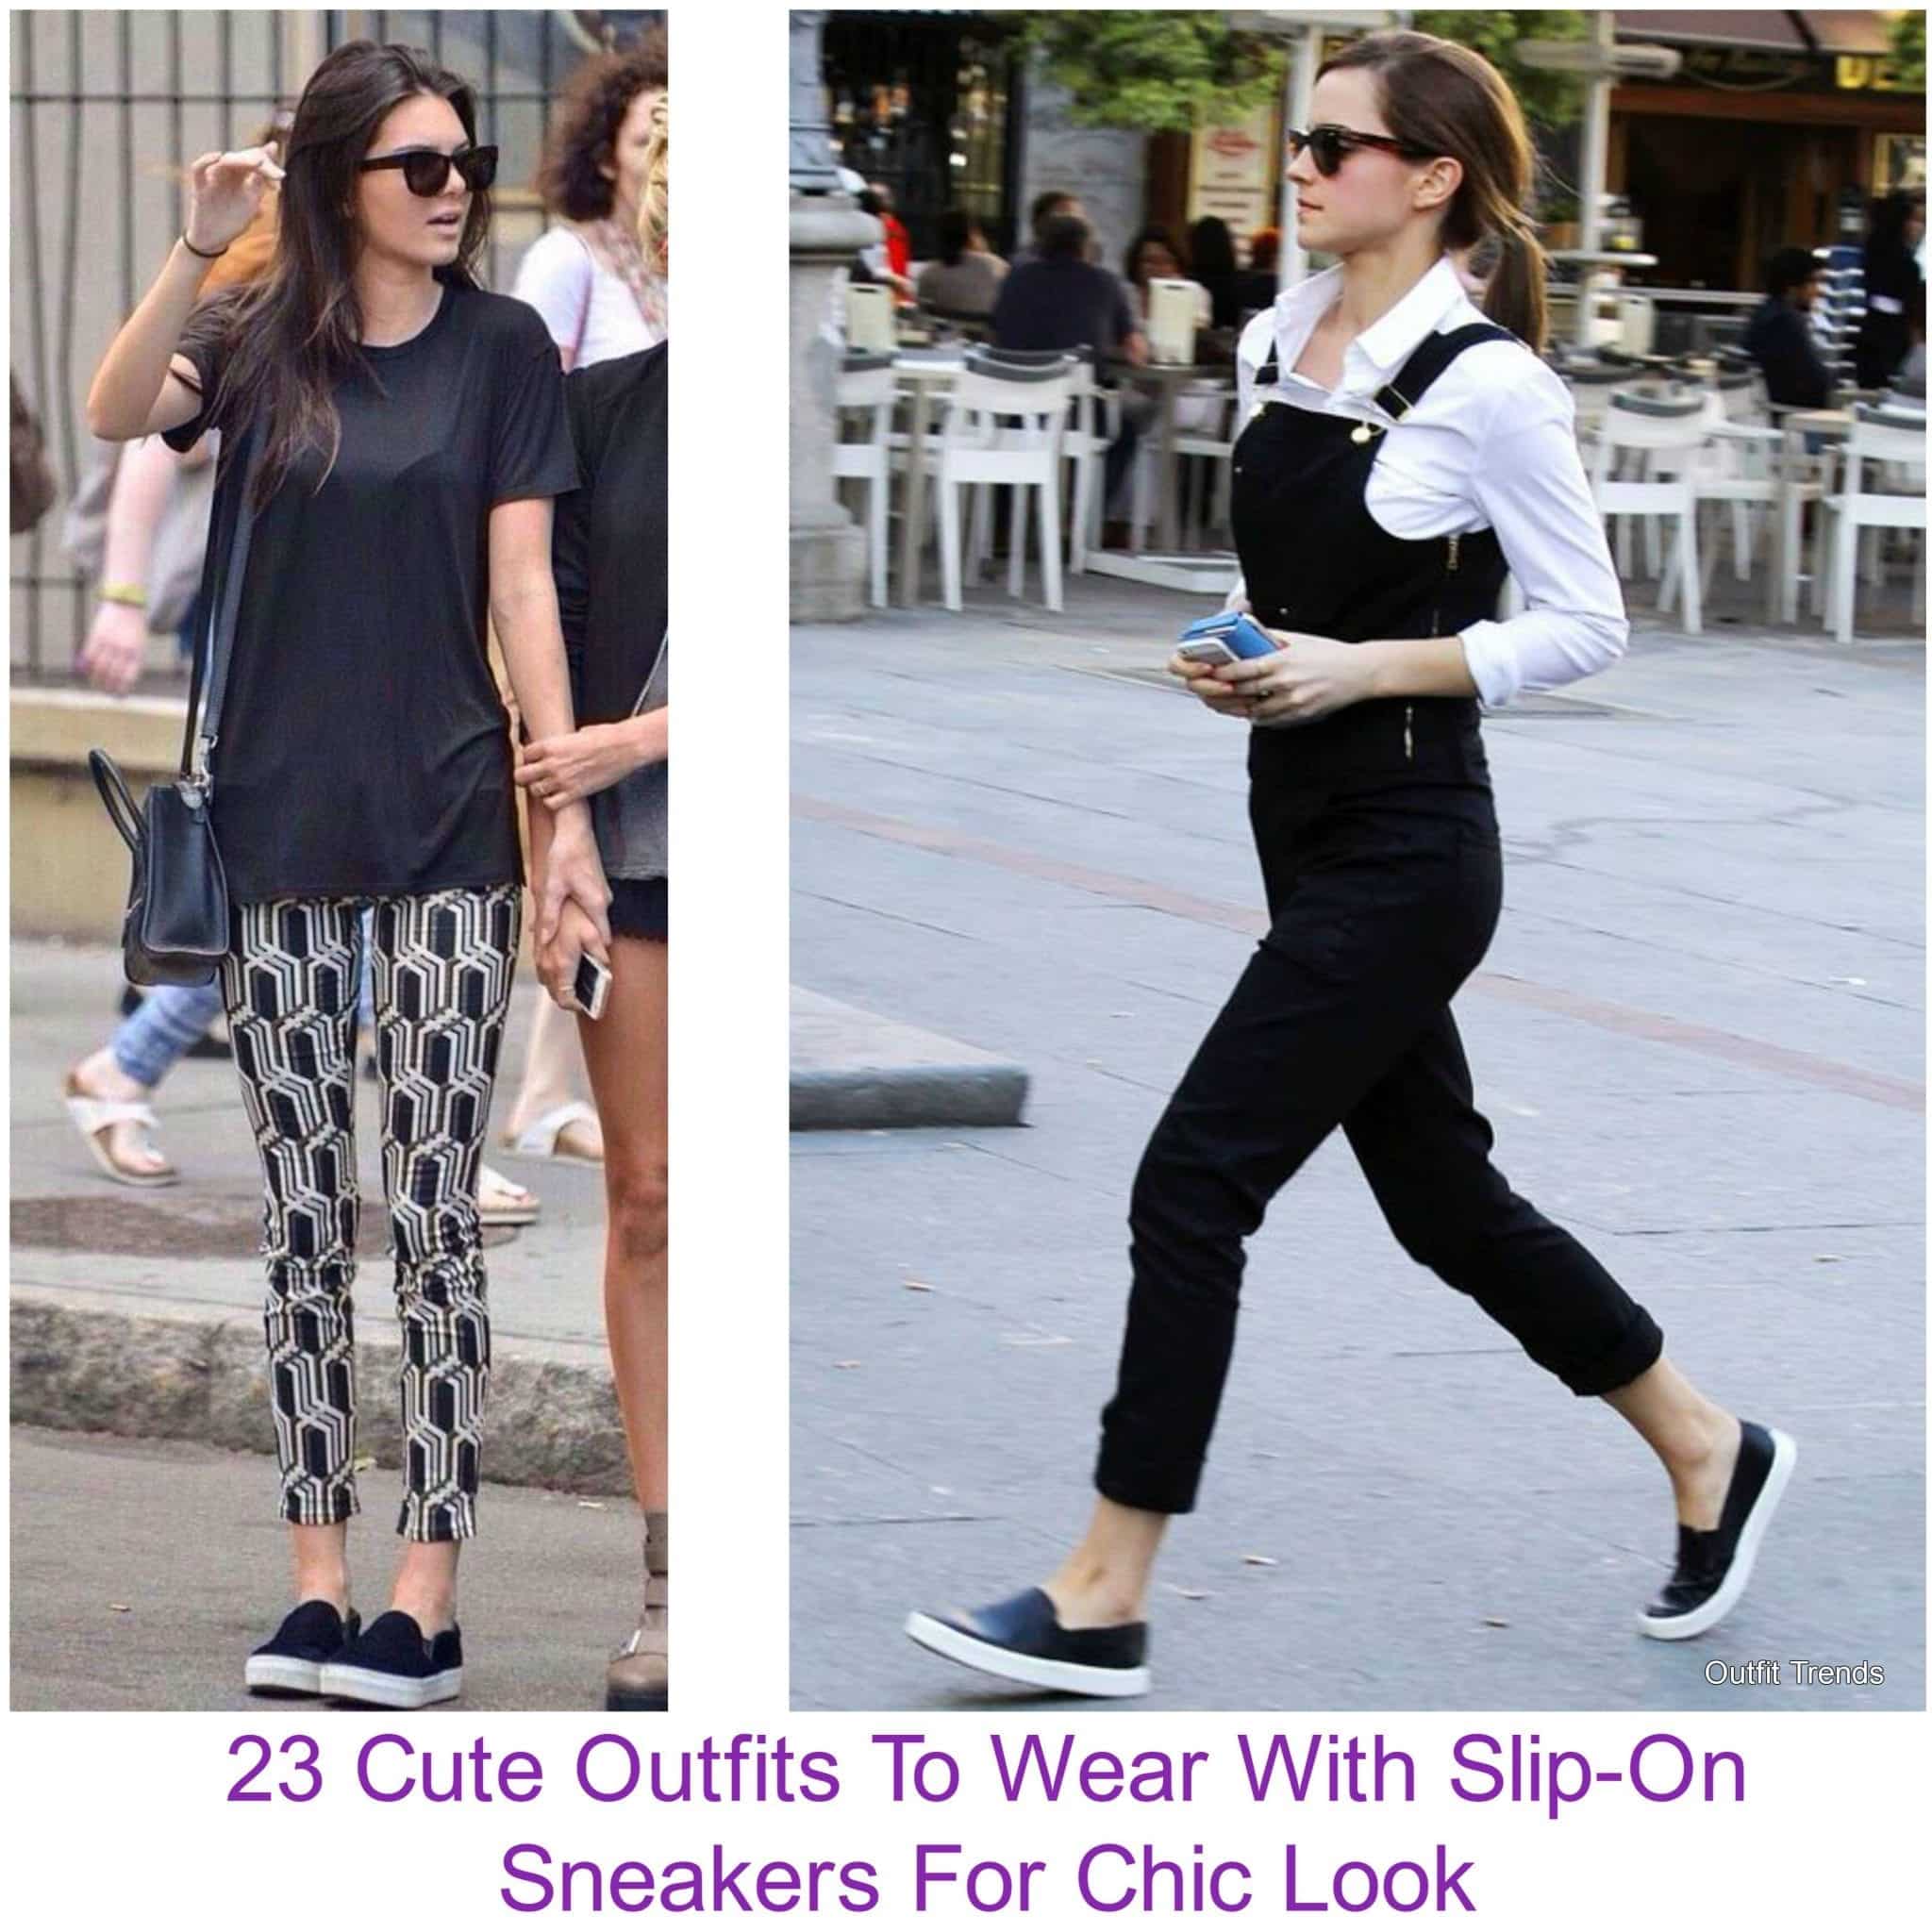 23 Cute Outfits To Wear With Slip-On Sneakers For Chic Look